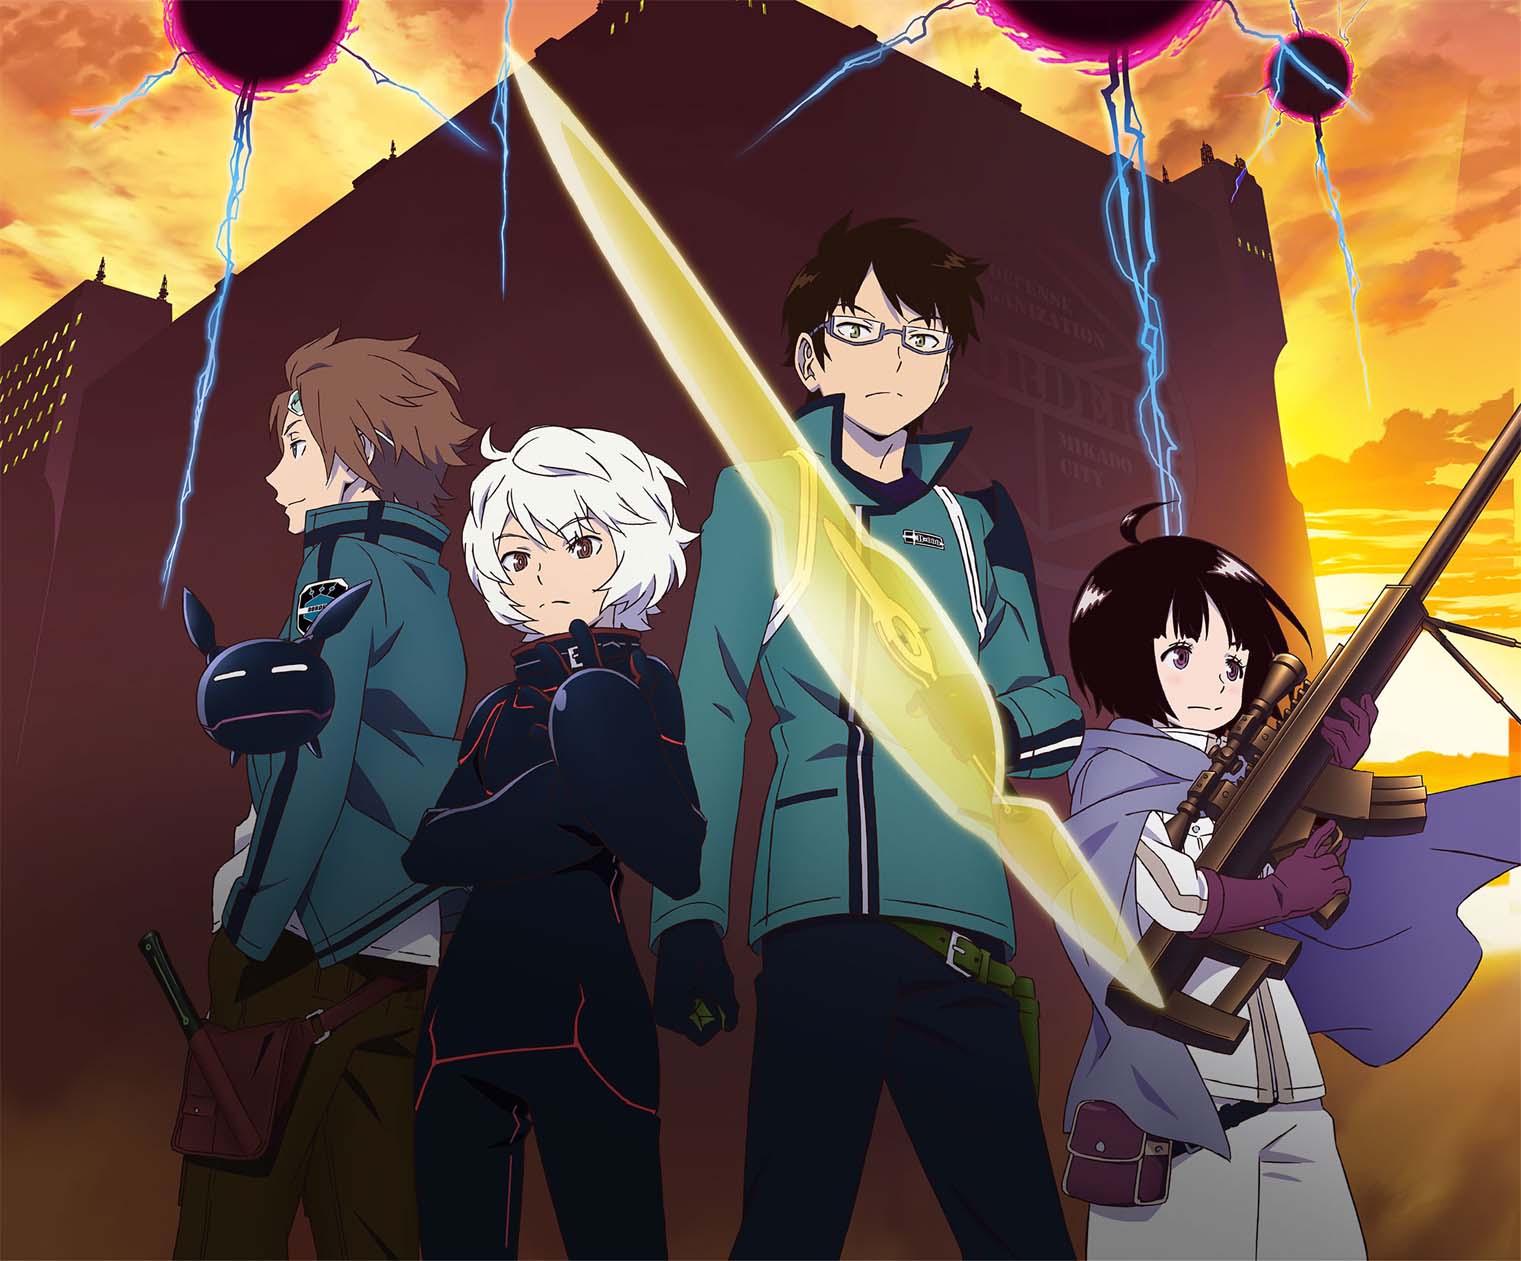 Aniradioplus - #NEWS: 'World Trigger' anime reveals new teaser visual for  Season 3, more details on upcoming live-action stage The official website  and Twitter of Daisuke Ashihara's World Trigger anime series have,